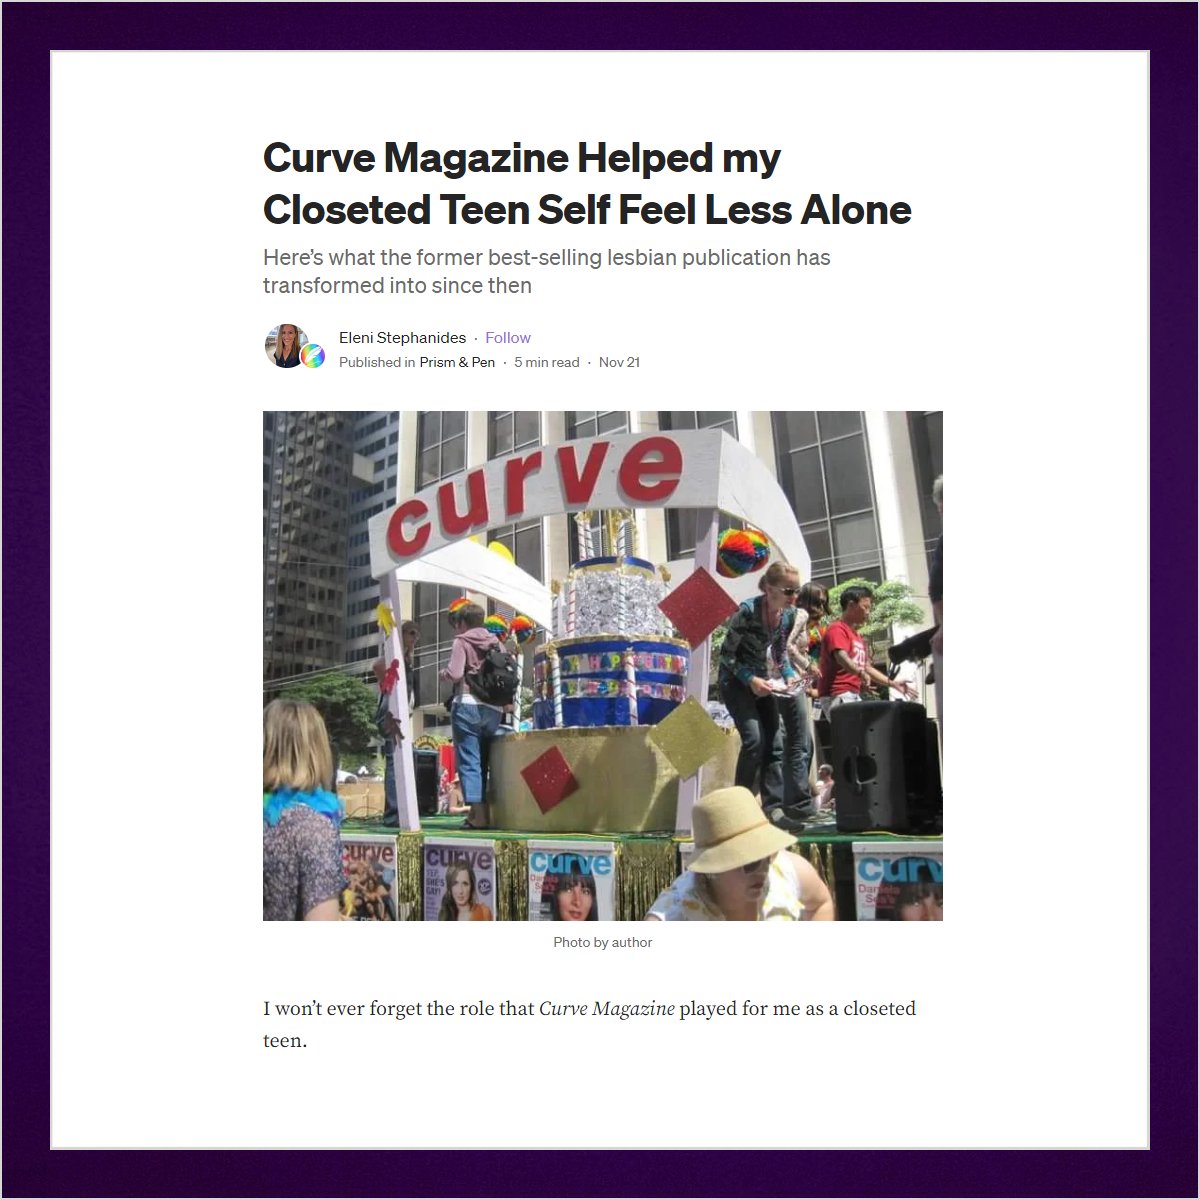 New piece, 'Curve Magazine Helped my Closeted Teen Self Feel Less Alone' 👉 bit.ly/3N87Iq2 Thank you to Eleni Stephanides (@esteph42190) for this fun trip down memory lane ... a good reminder that #RepresentationMatters, always! #CurveMagazine #LesbianVisibility 💜🏳️‍🌈